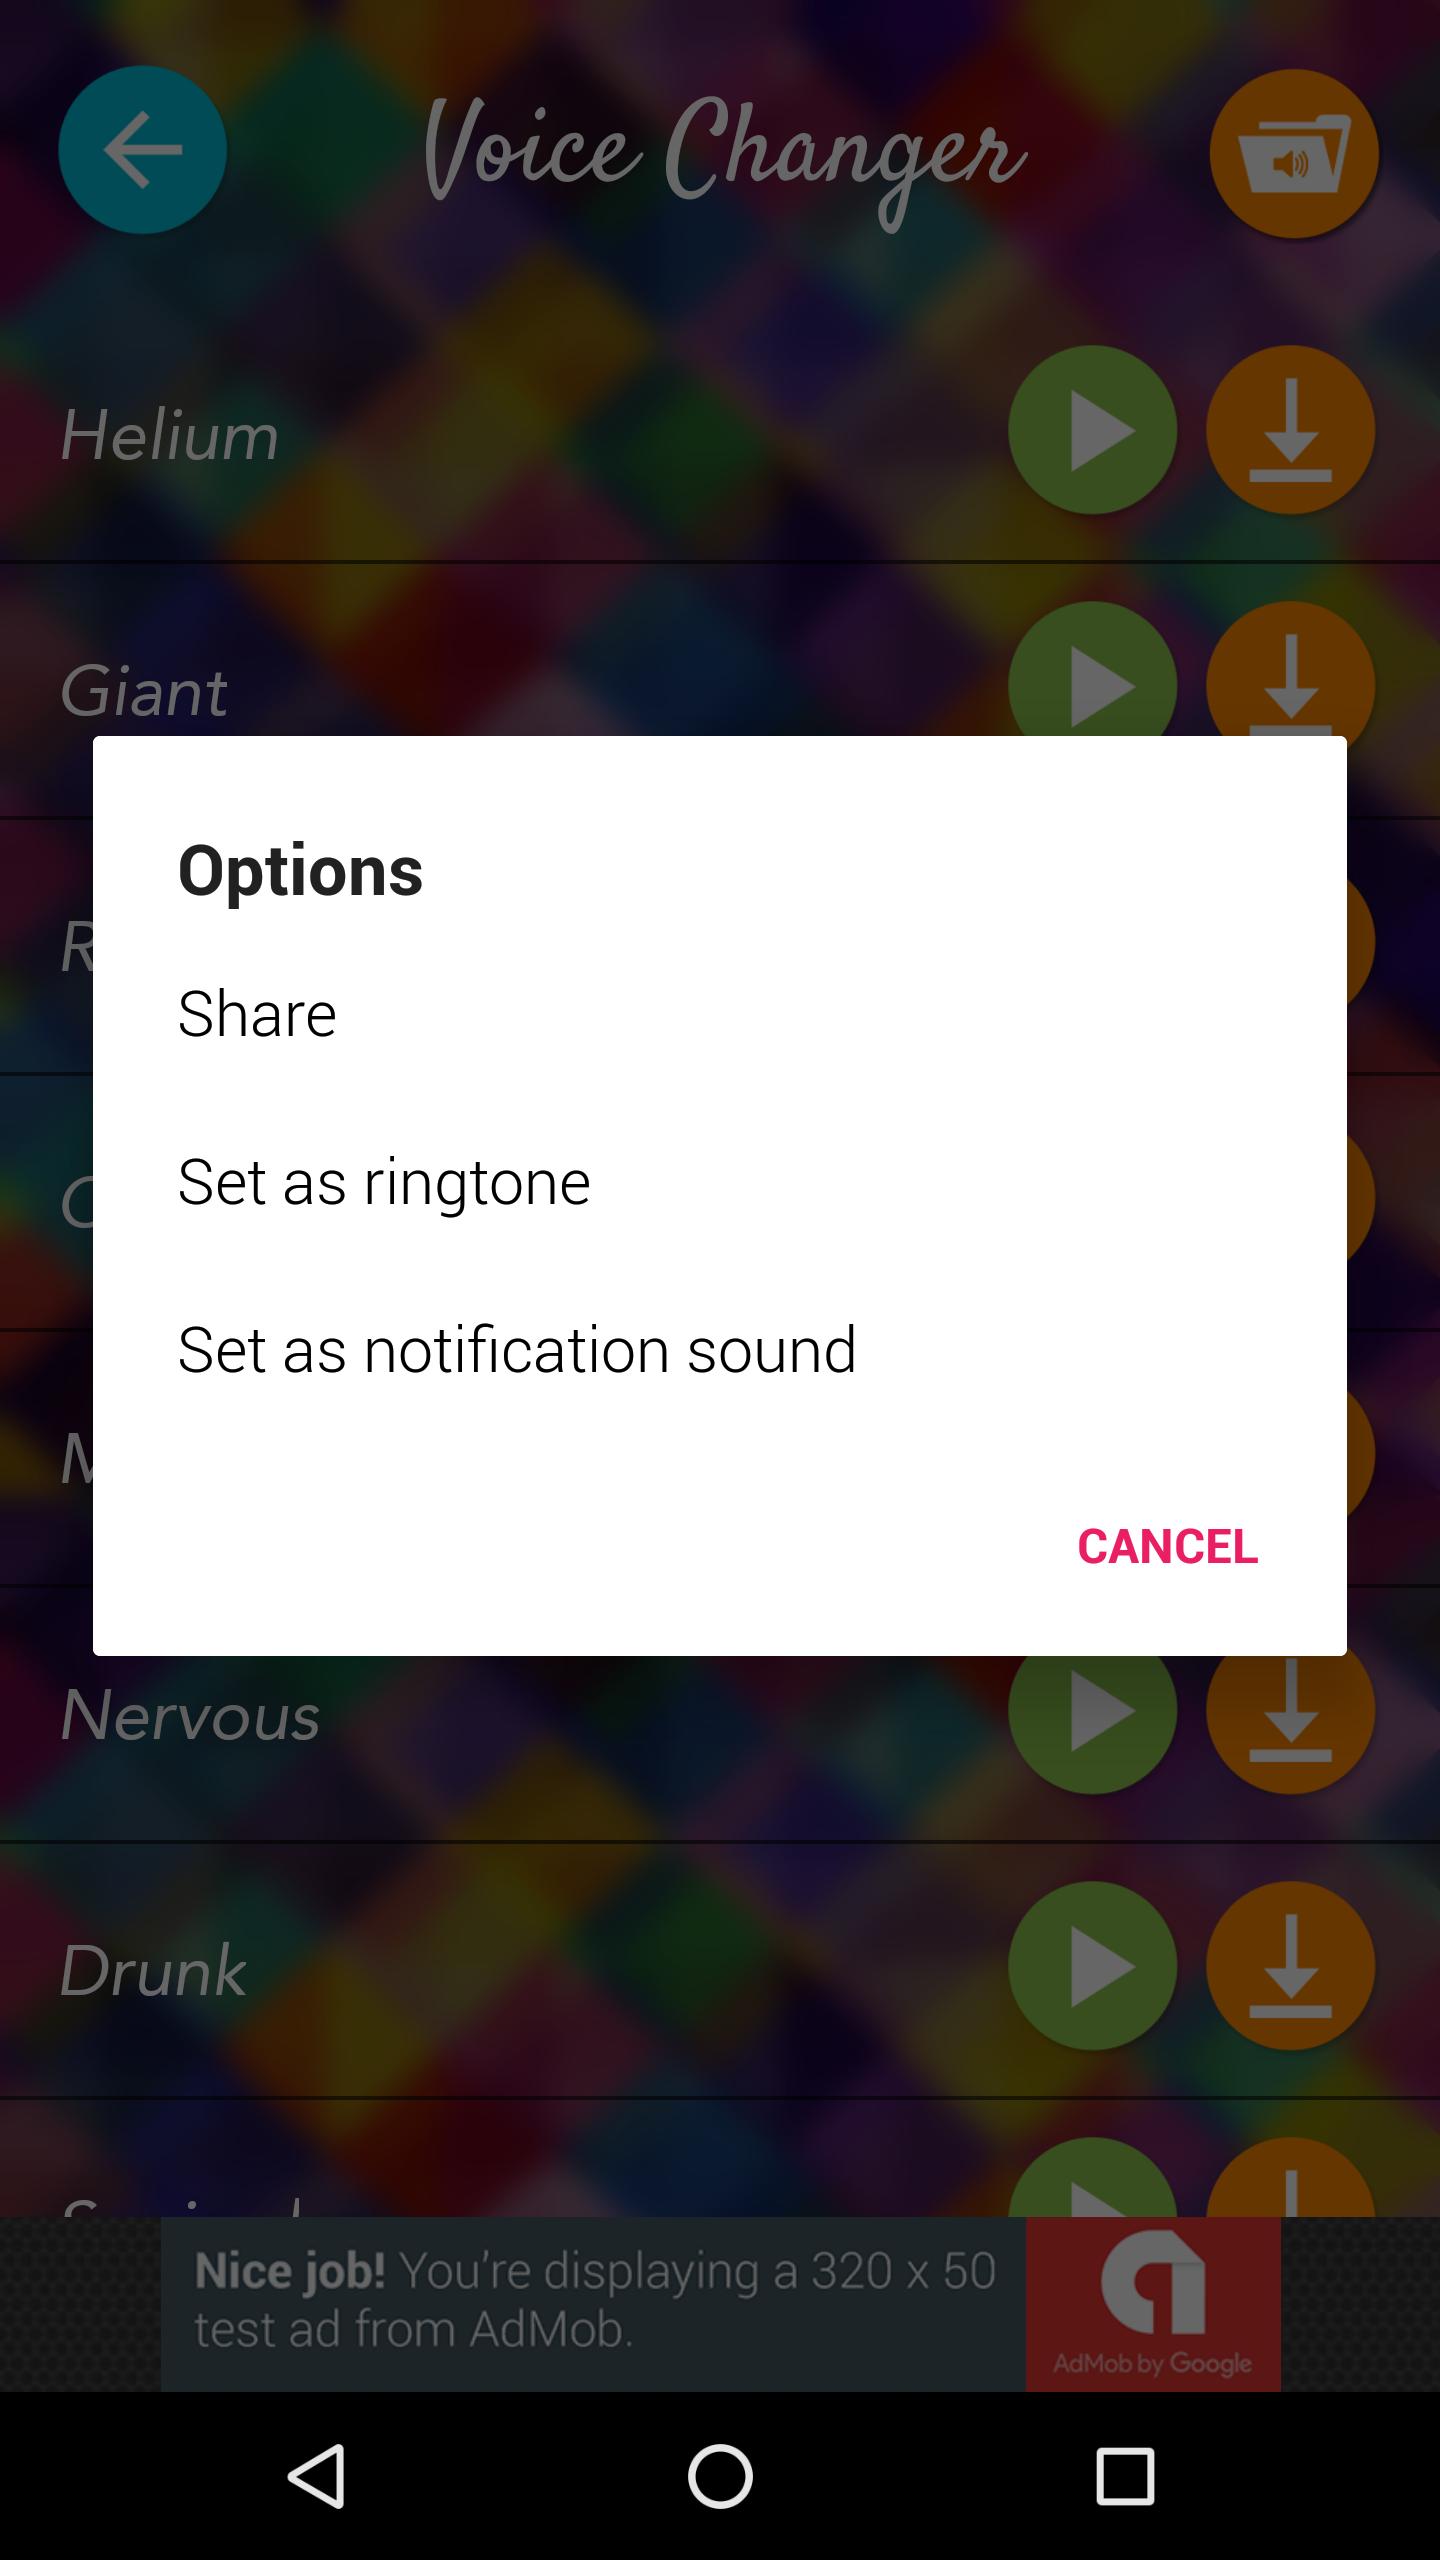 Funny Voice - Make your voice Sound Funny for Android - APK Download